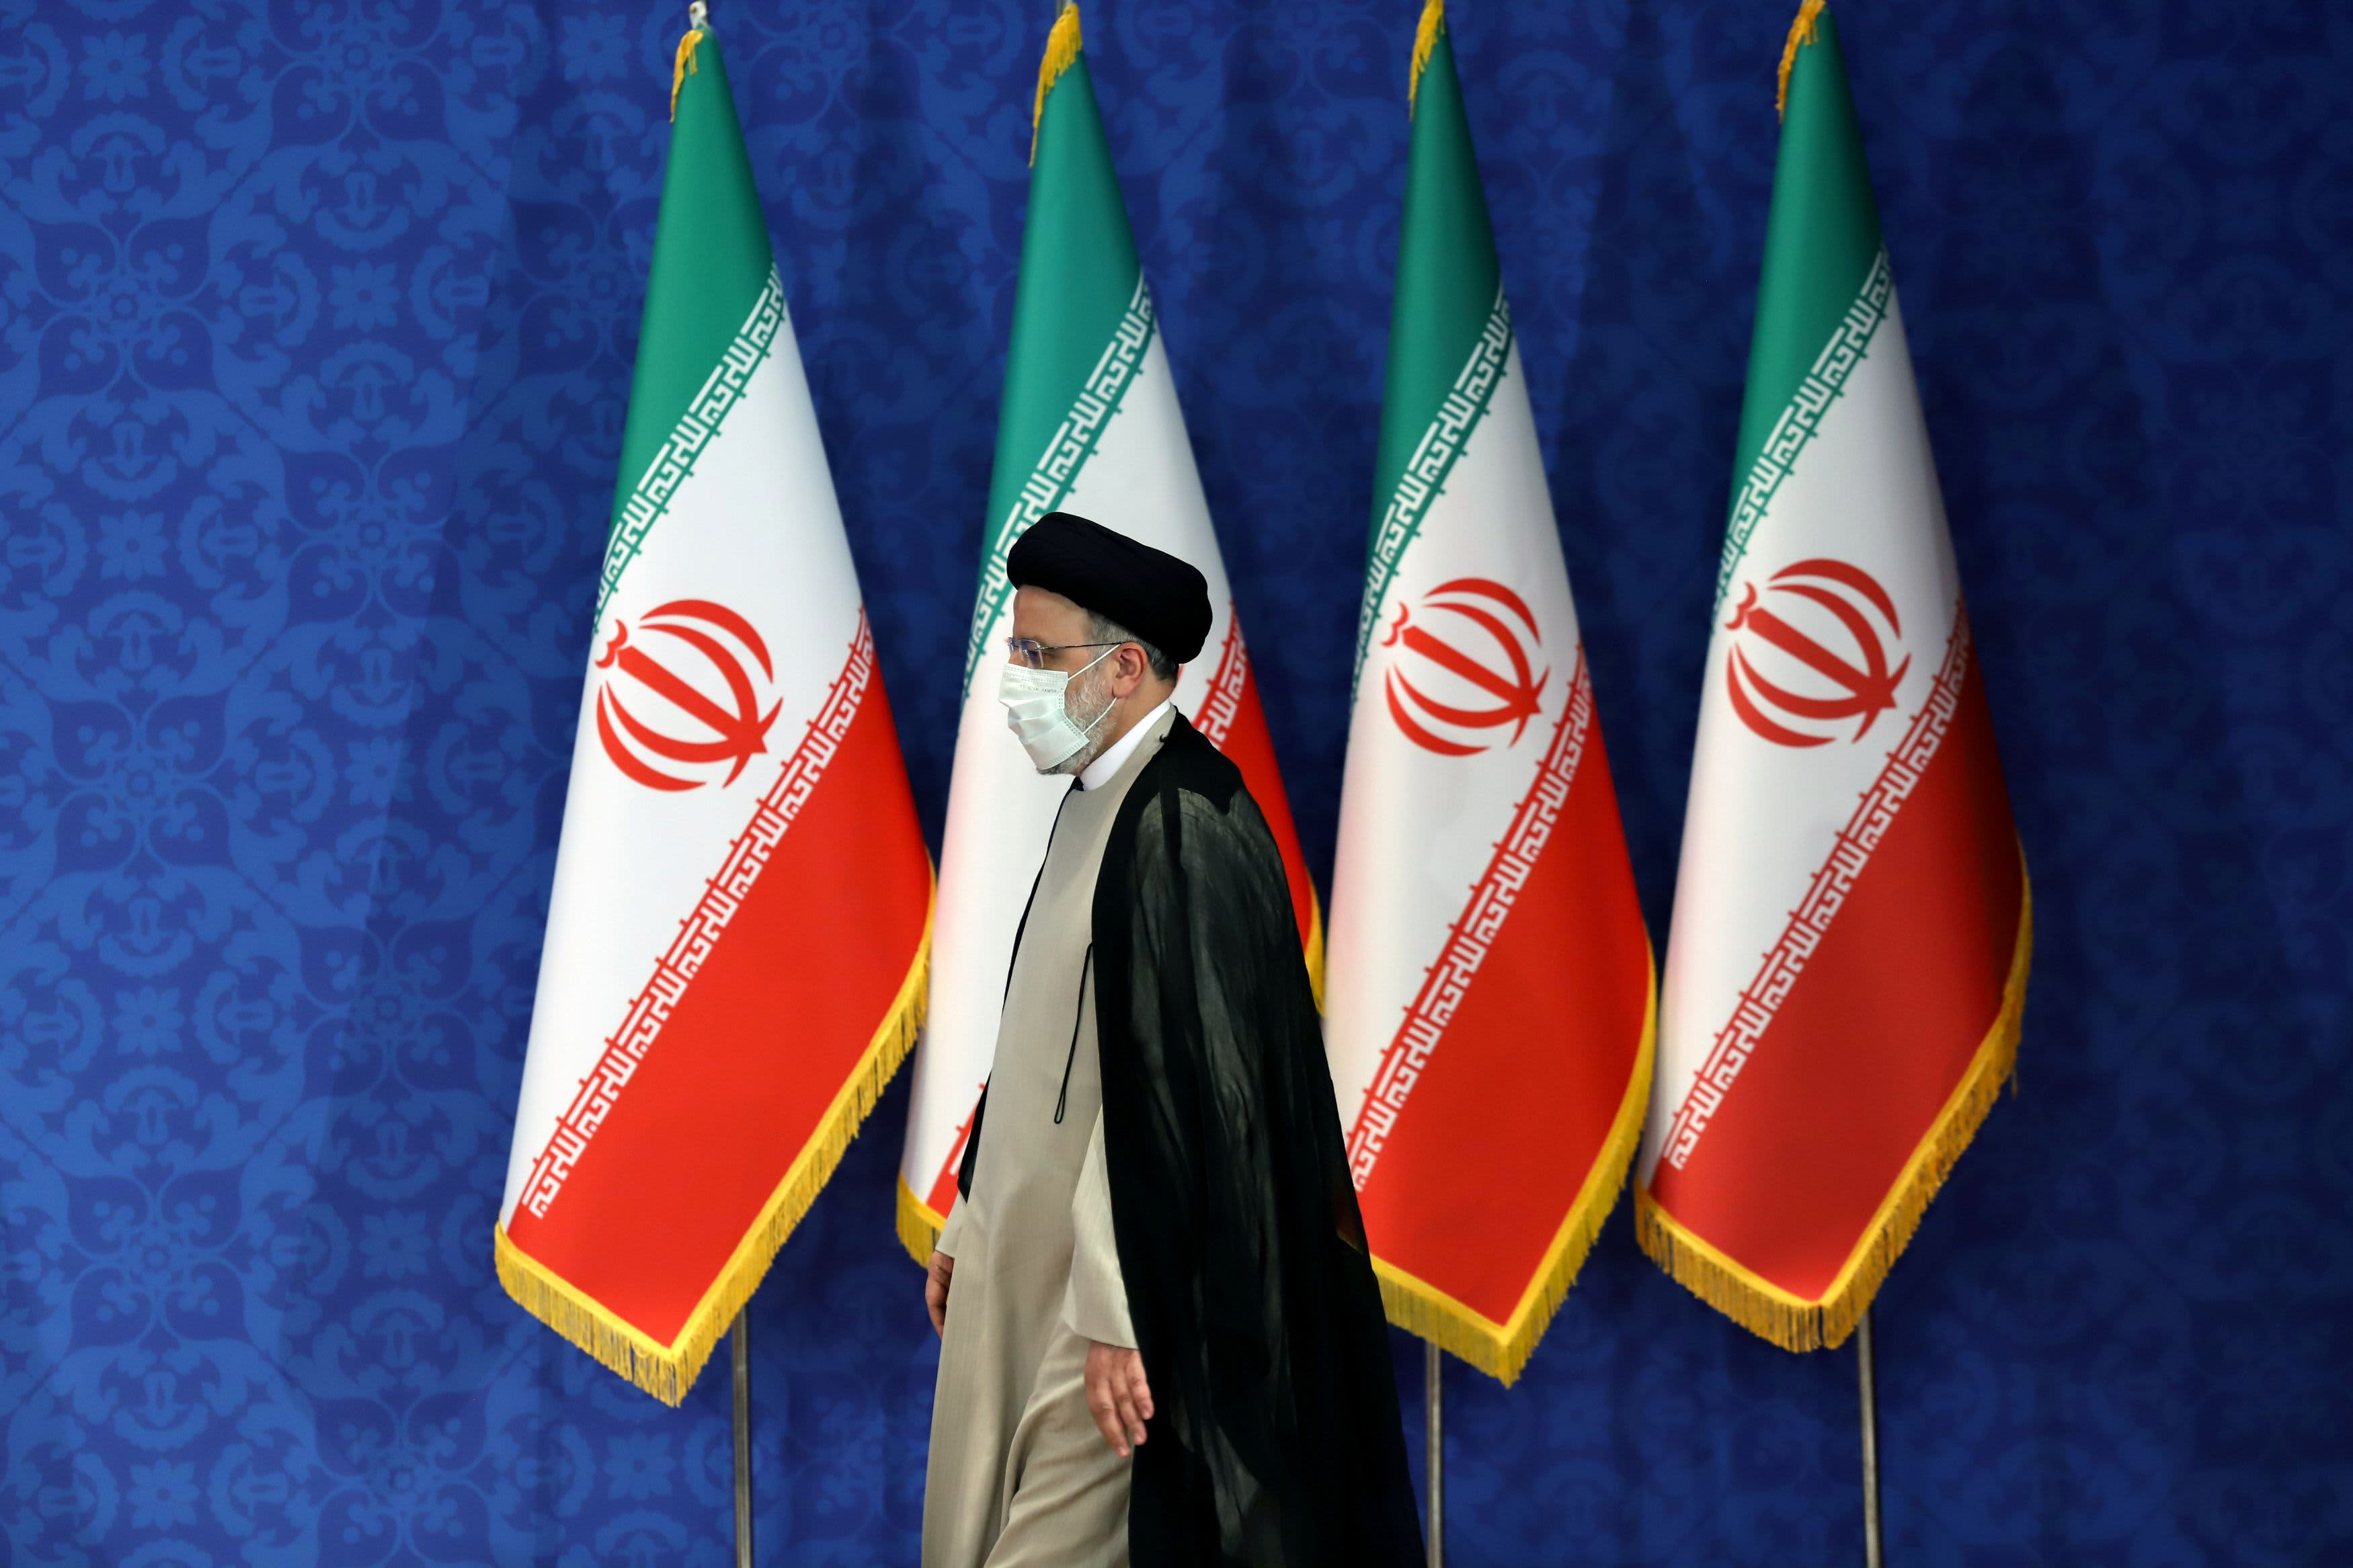 Iran’s presidential election raisi stipulates conference bidding, and the oil market looks forward to nuclear agreement